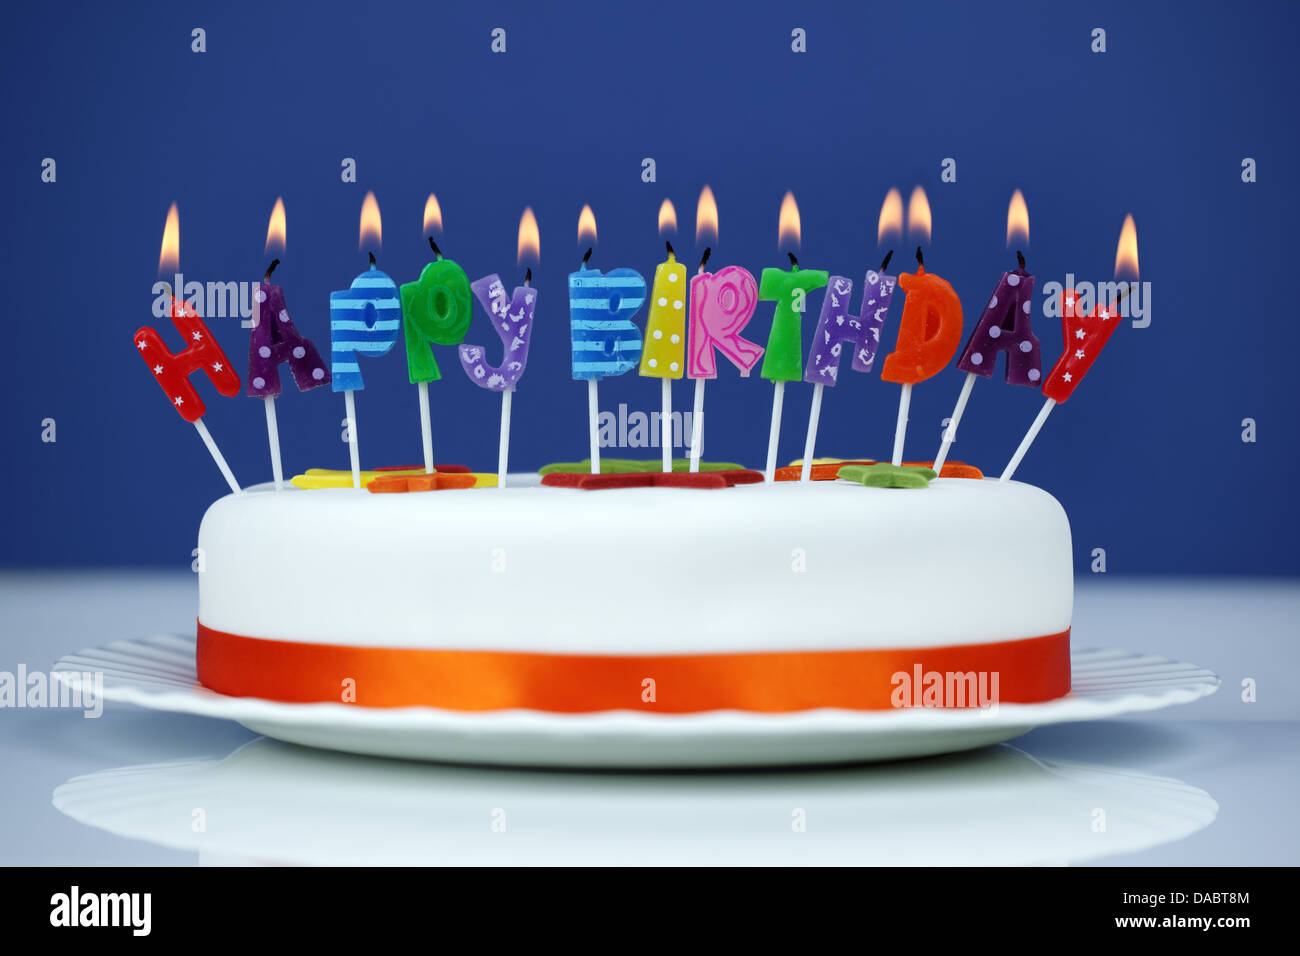 Happy birthday candles on a cake Stock Photo